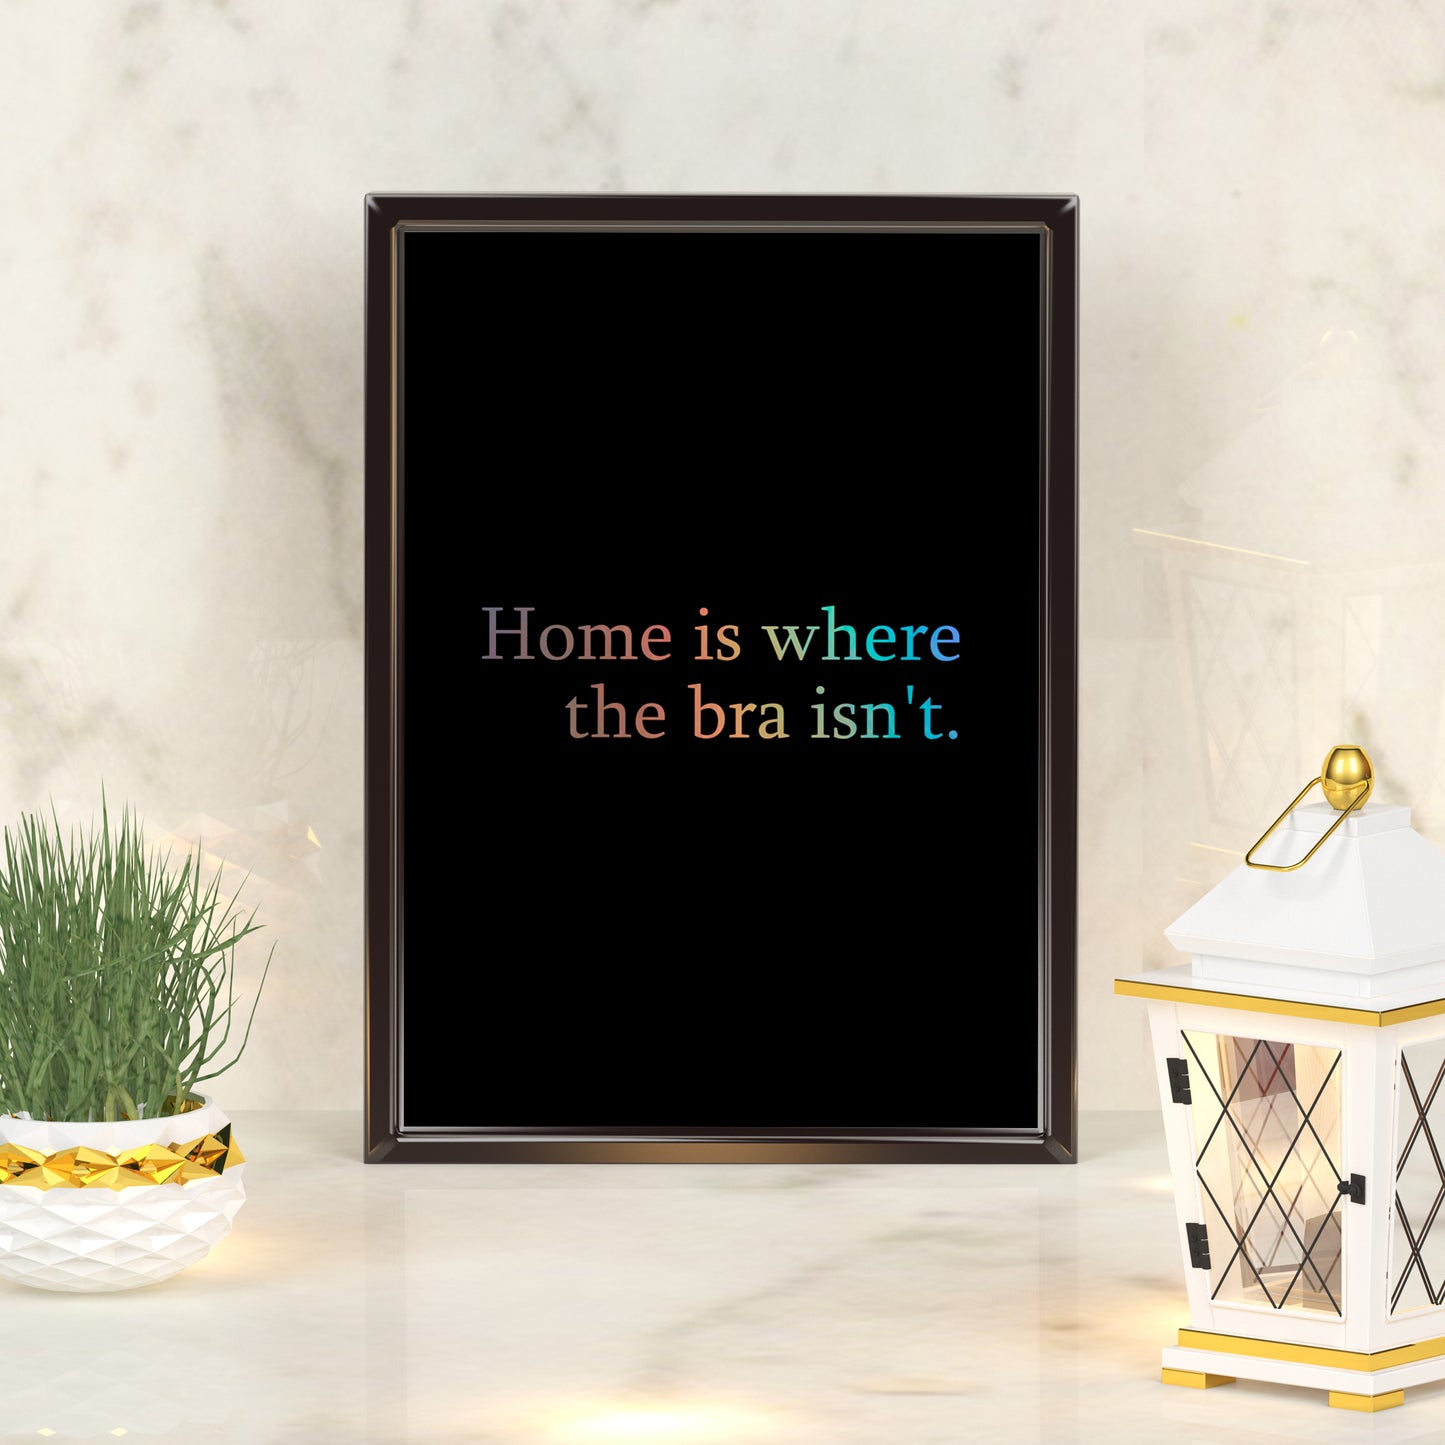 Home is where the bra isn't | A4 Foil Print Quote